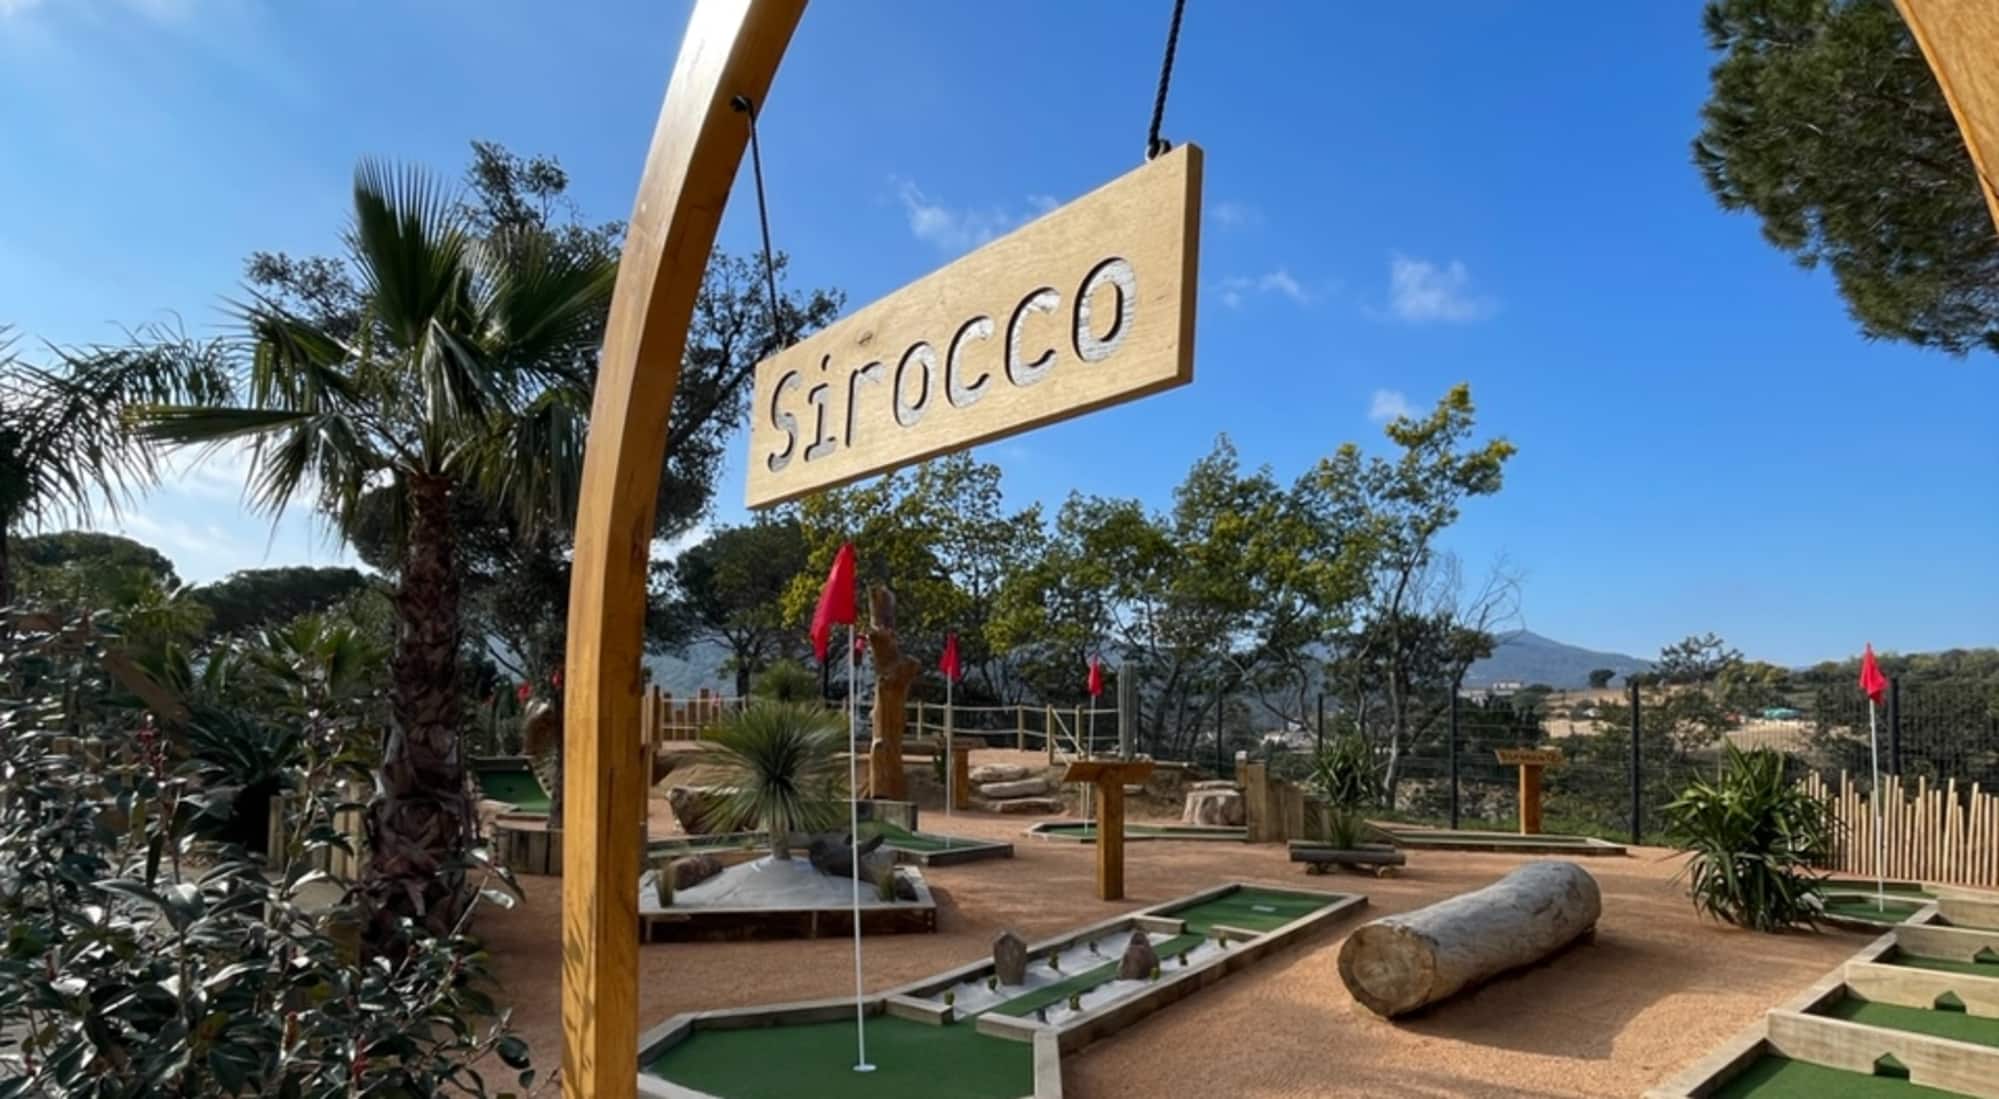 3-Sirocco-Aventure-Family-mini-golf-parcours